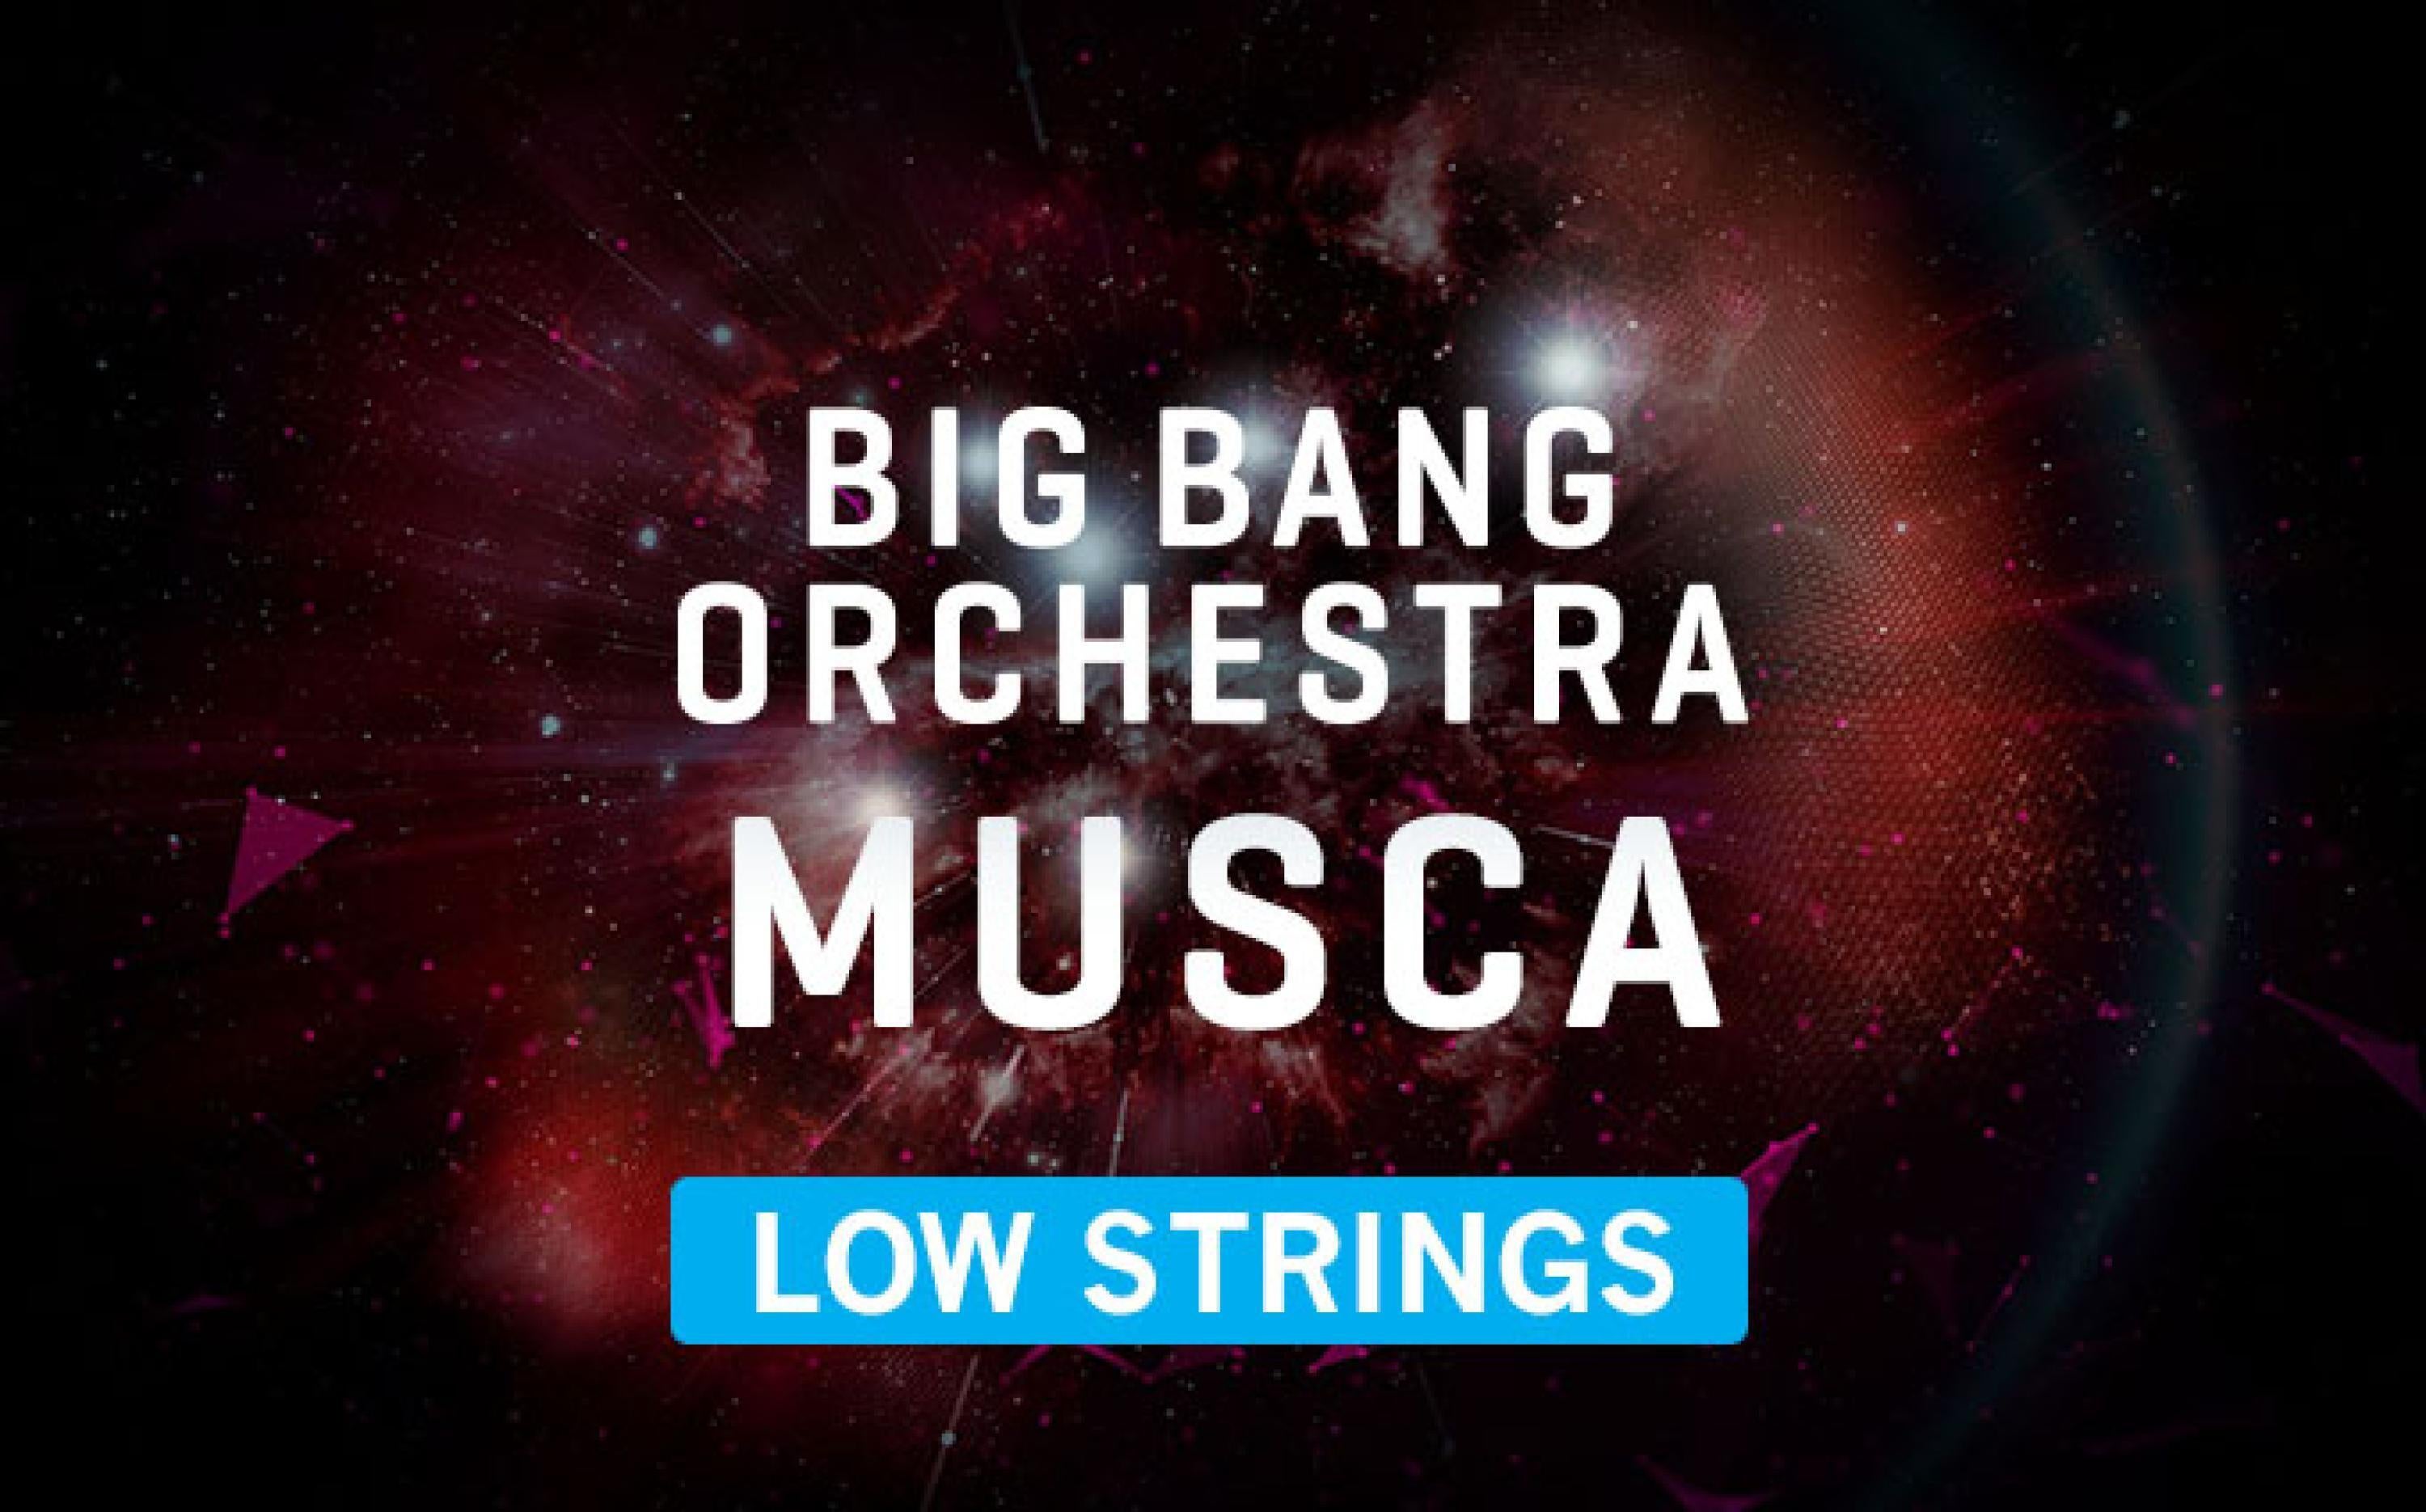 Vienna Symphonic Library Big Bang Orchestra: Musca Low Strings